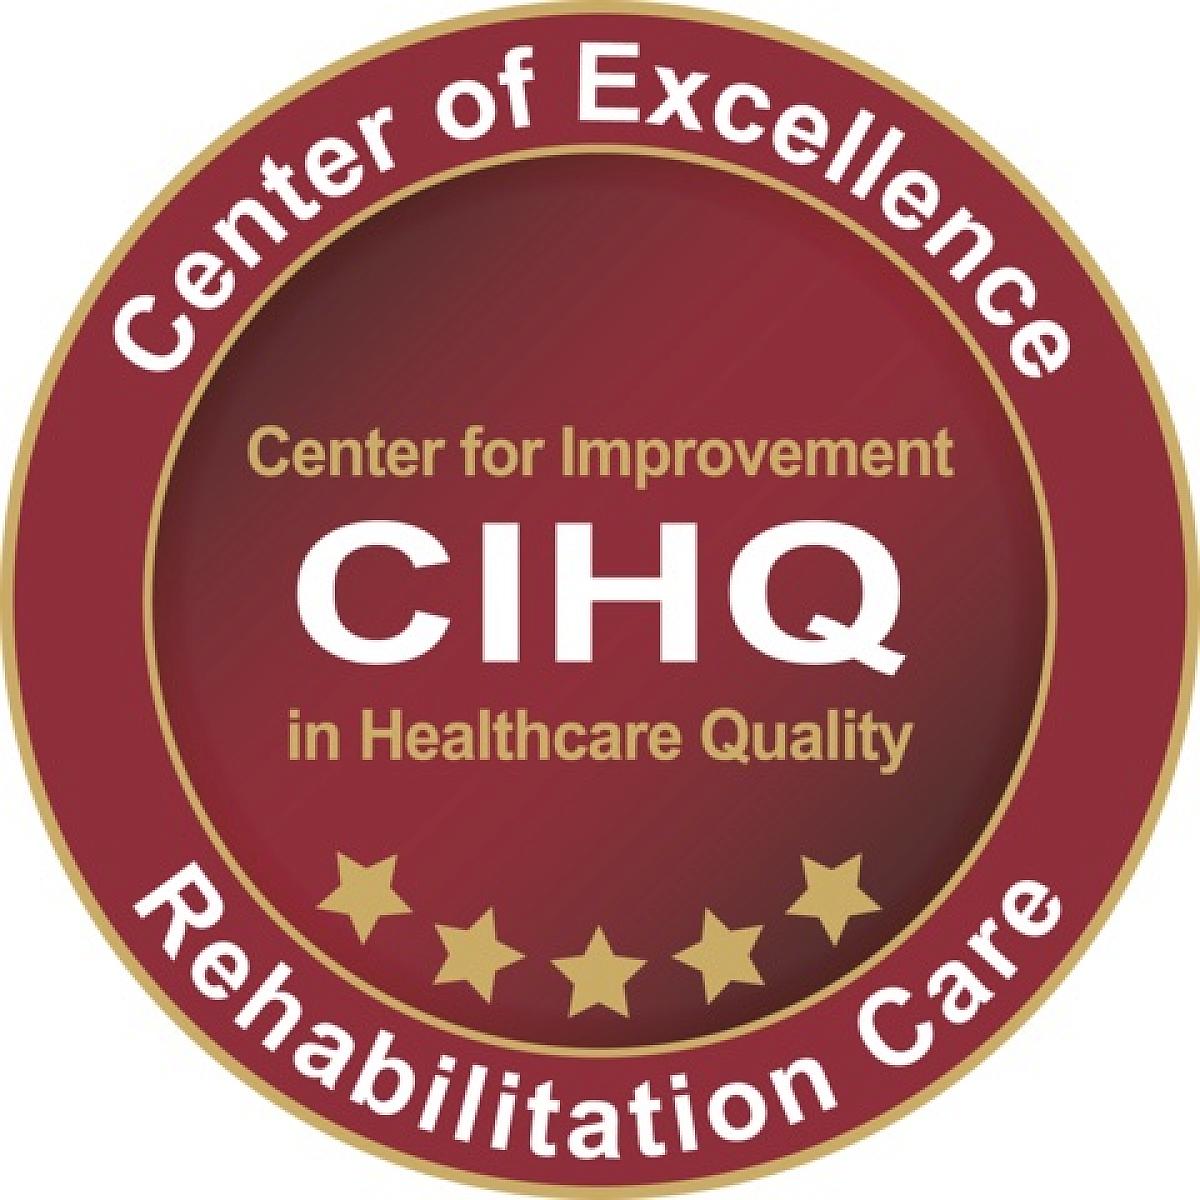 Picture of center of excellence in rehabilitation care logo